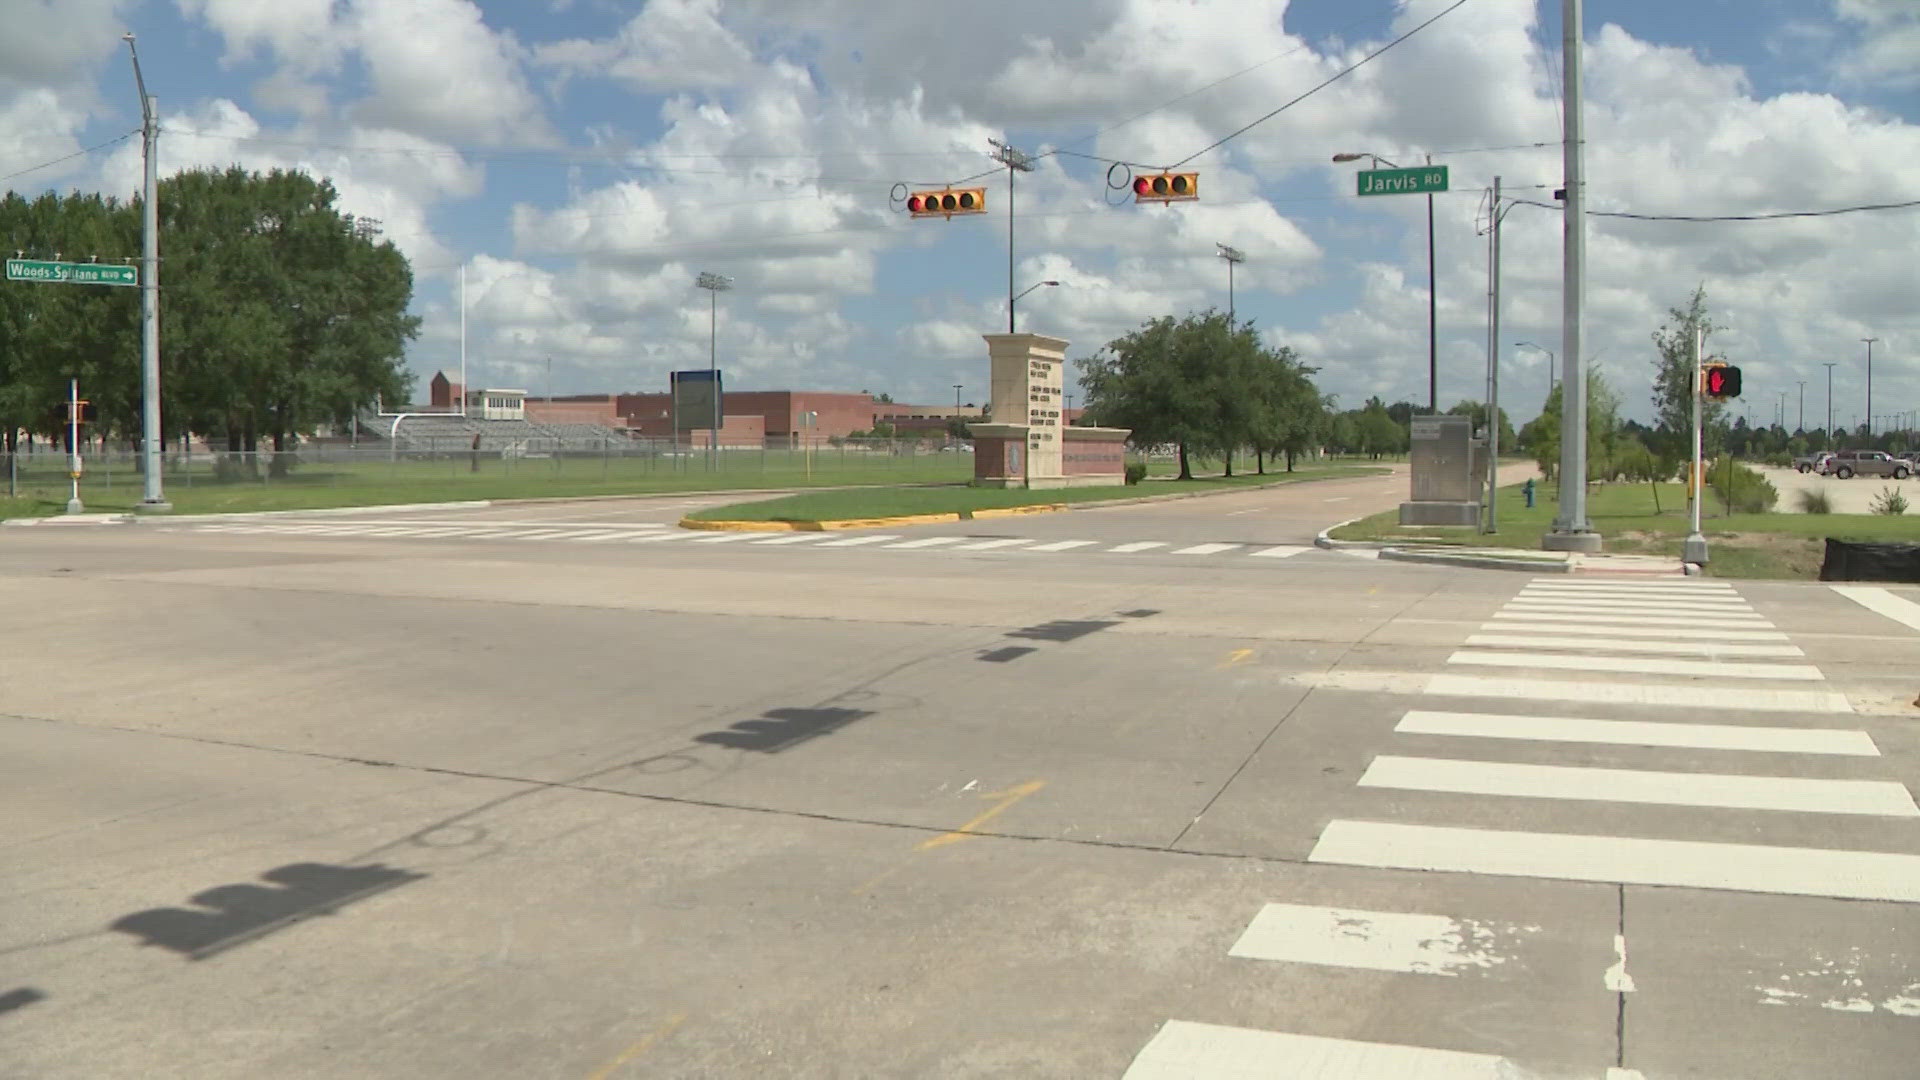 Budget cuts are forcing district leaders to make changes to bus routes next school year. Some parents are concerned there are not enough sidewalks for their kids.